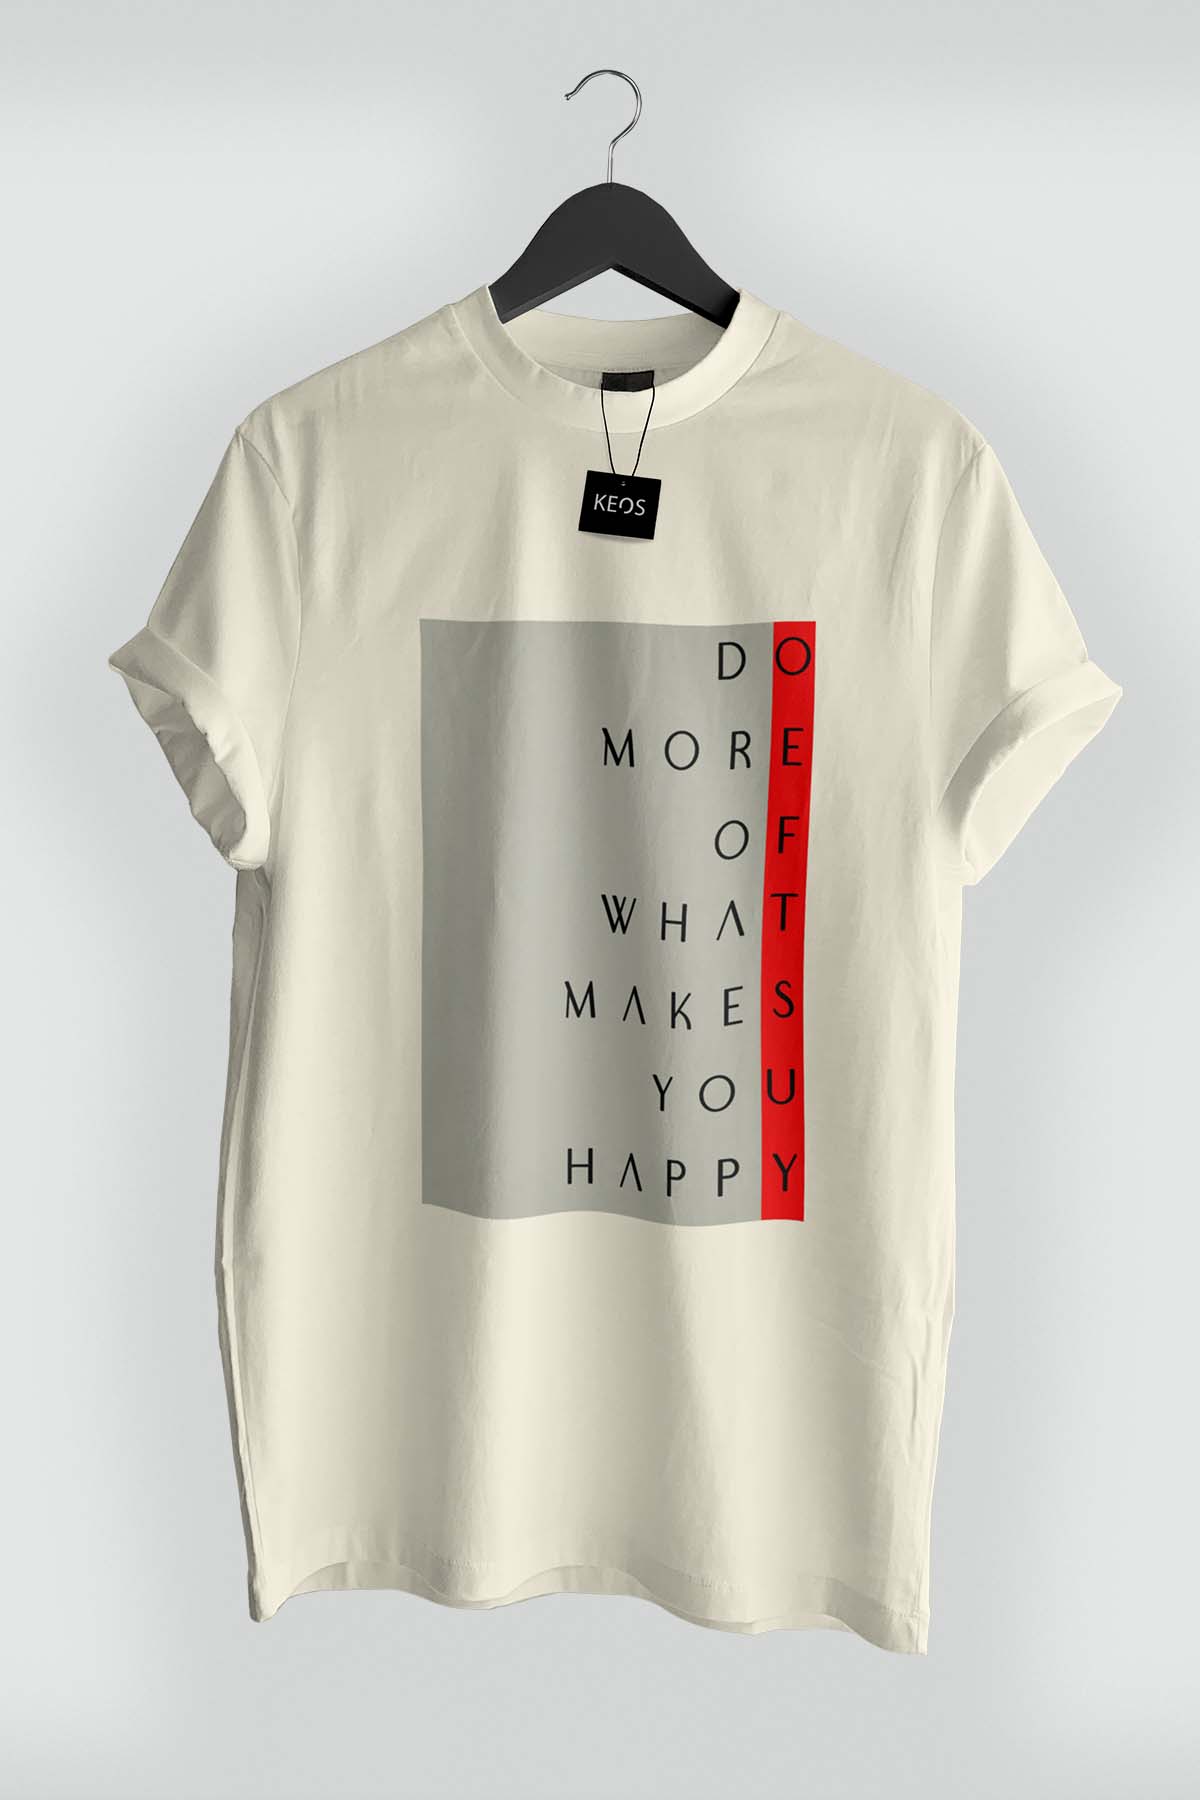 Do More of What Makes You Happy Organic Cotton T-shirt - keos.life